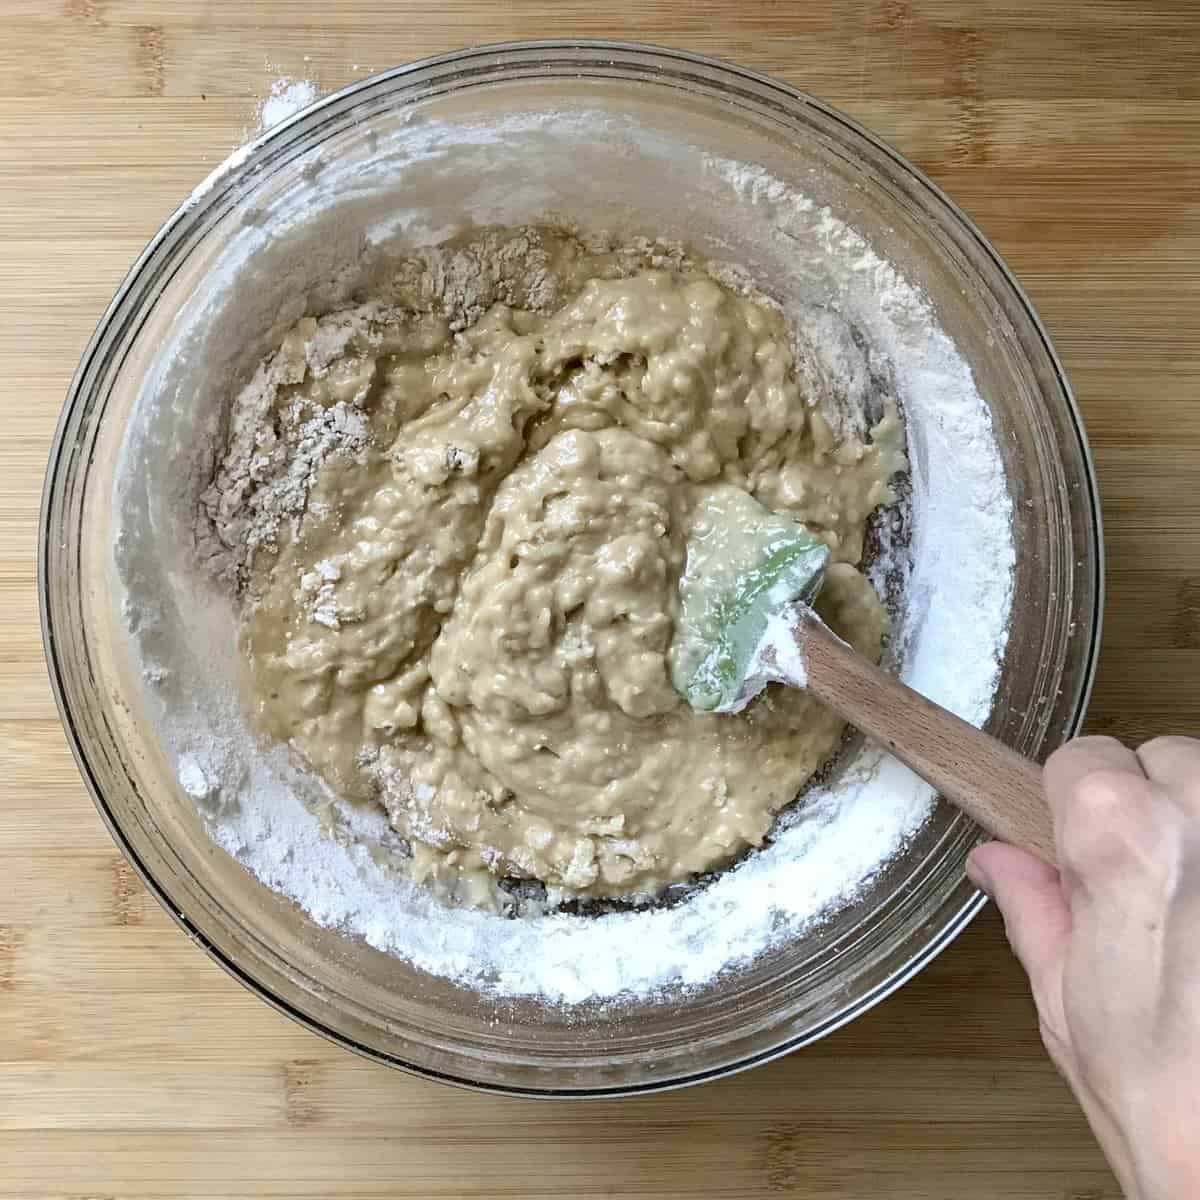 The wet and dry ingredients are combined together in a bowl. 